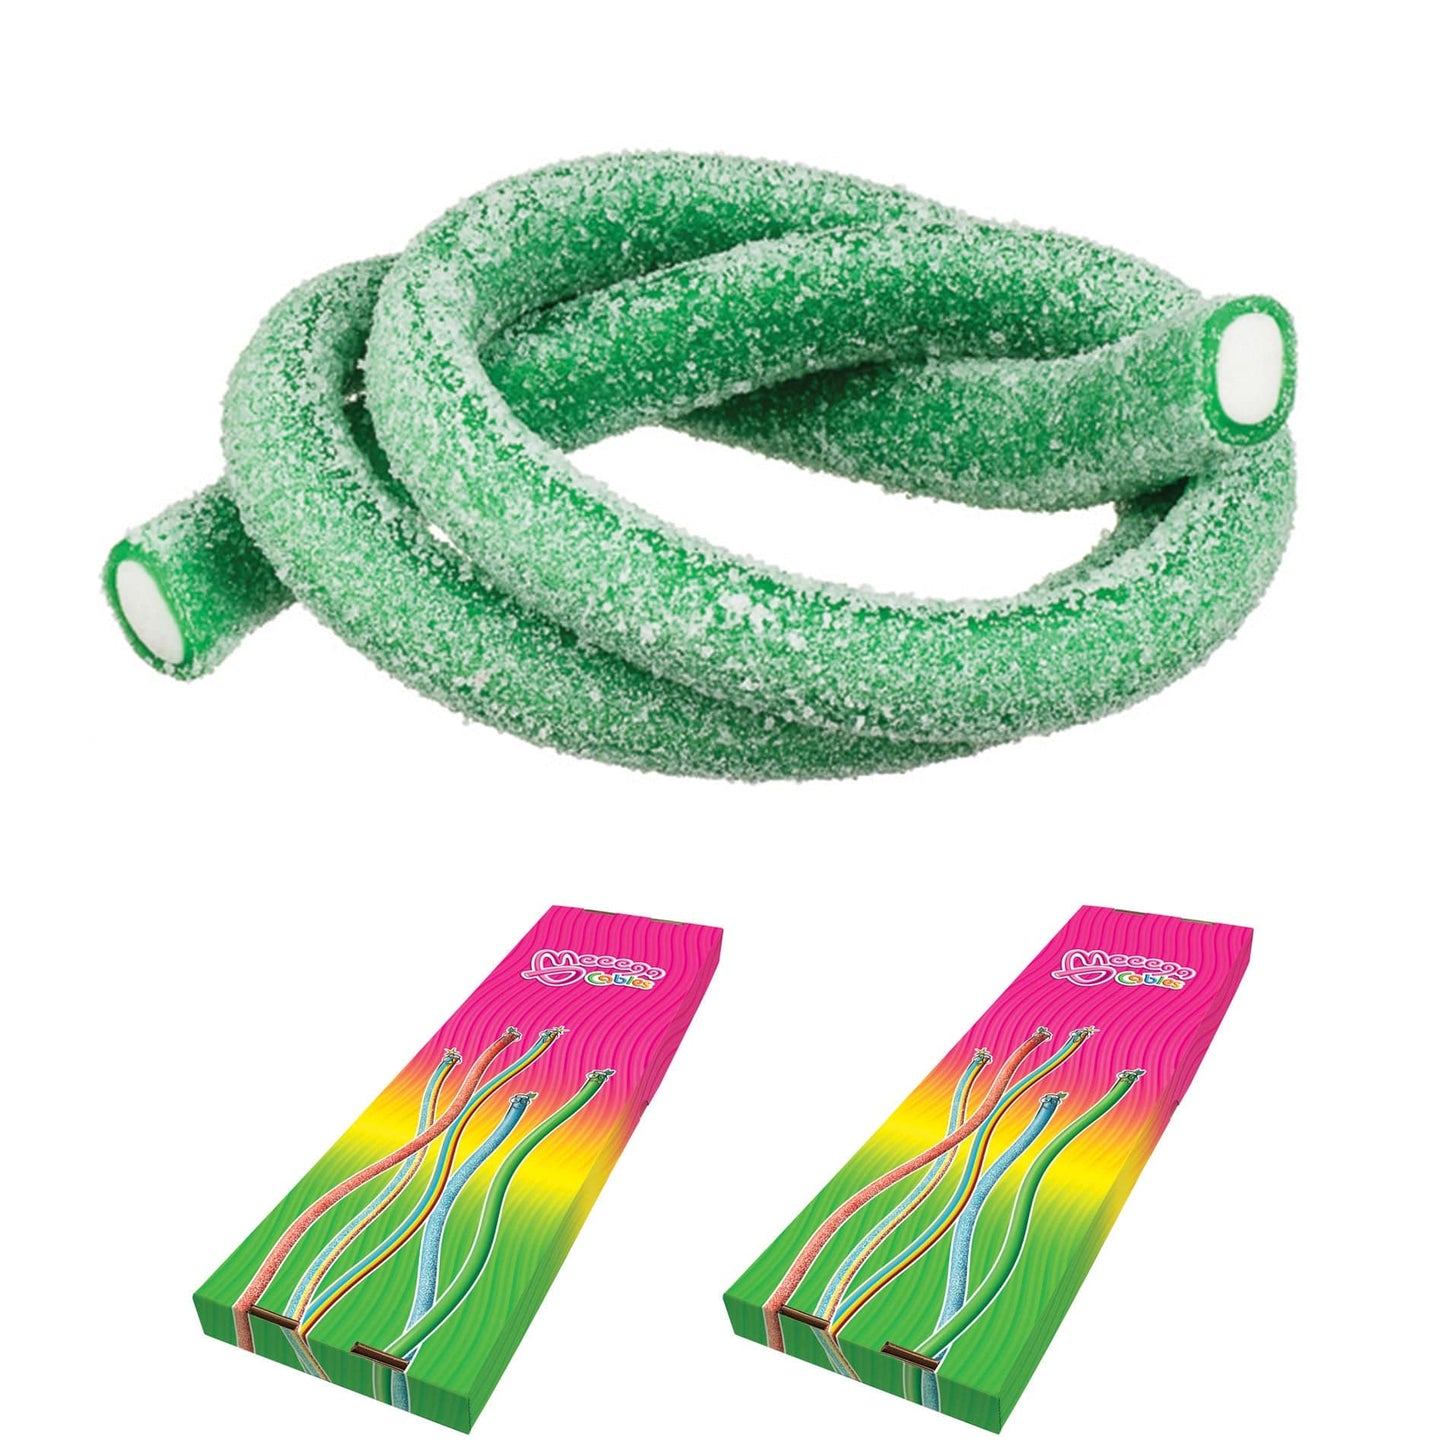 Novelty Concessions Gummy Rope SOUR APPLE / 2 Pack (60 pieces) Meeega Cables European Chewy Rope Candy - Box of 30 individually wrapped Meeega Cables, each over 2-feet long cups with lids and straws